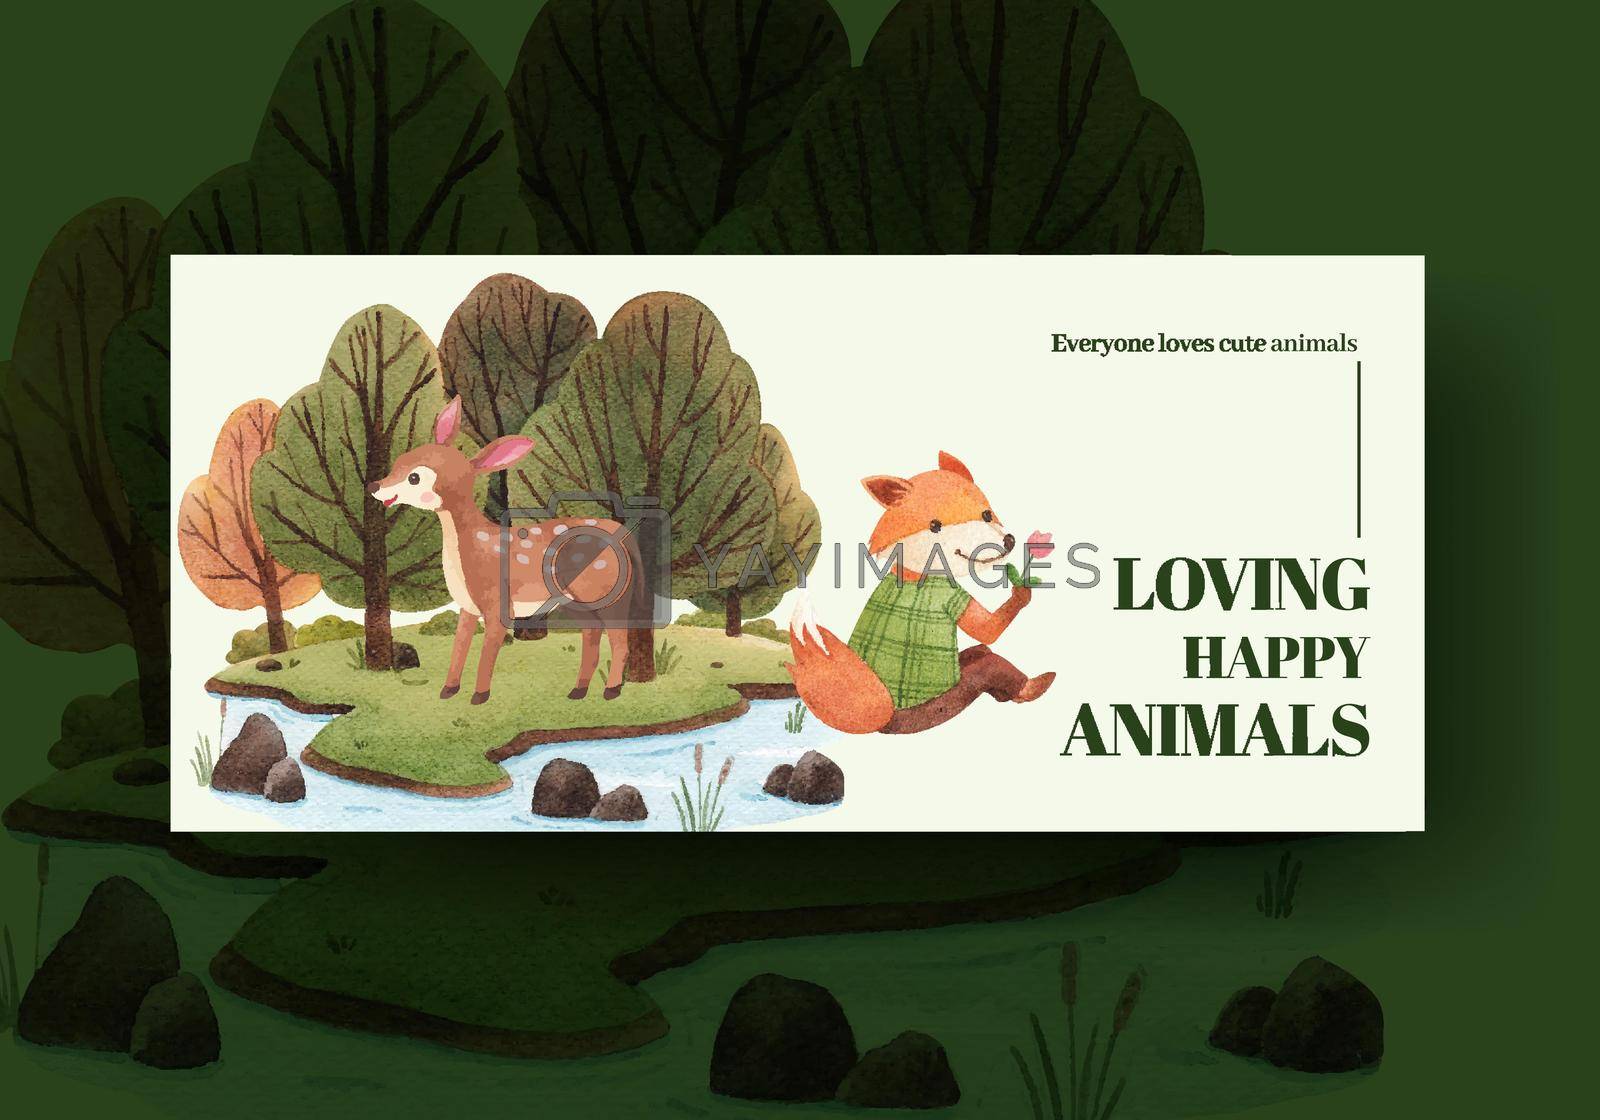  Billboard template with happy animals concept design watercolor illustration
